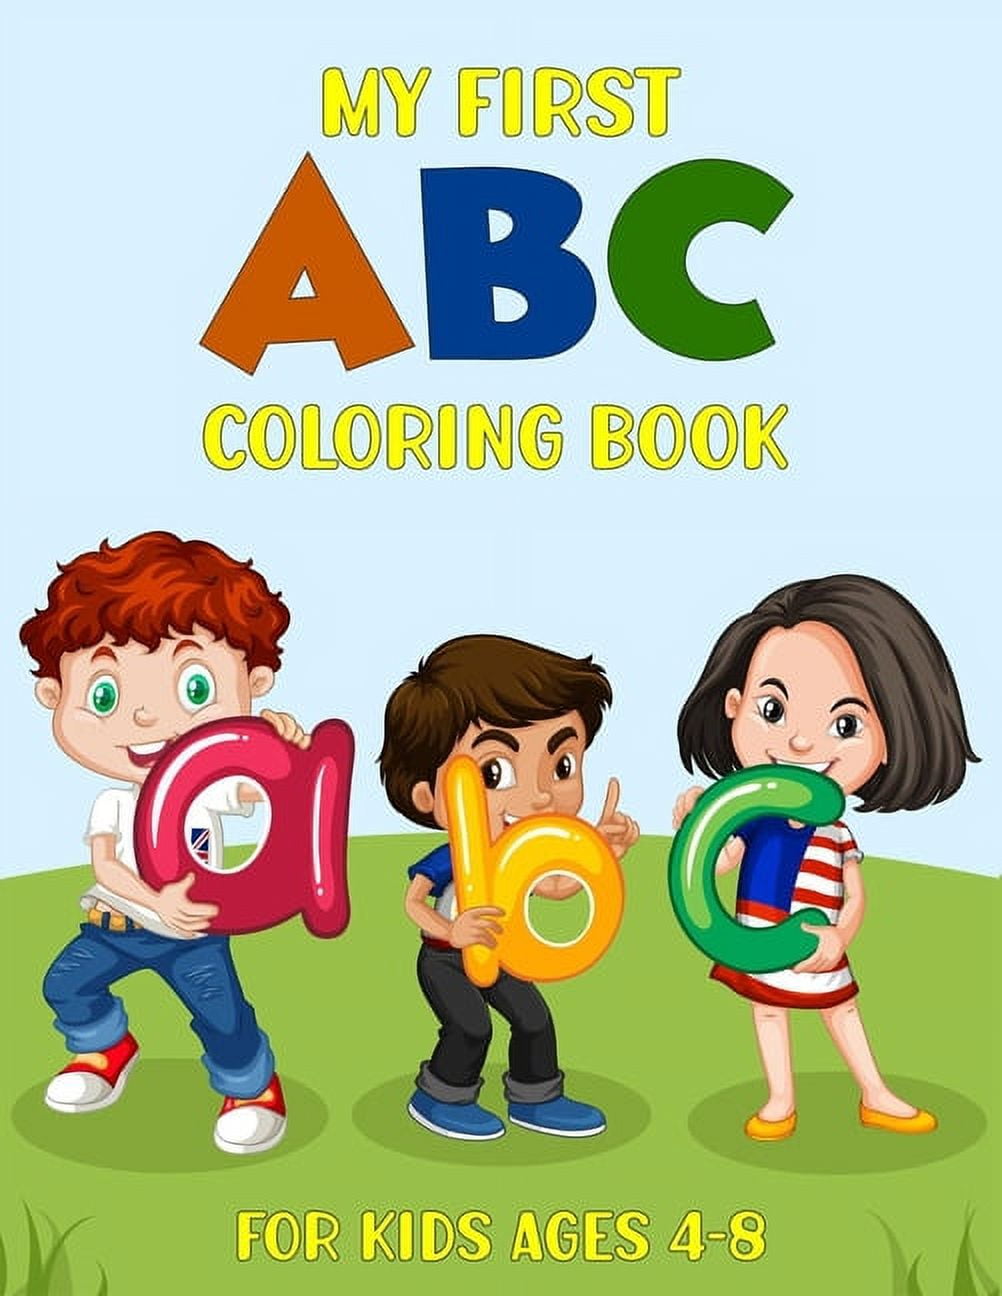 Barnes and Noble Coloring books for kids ages 2-4 letters and